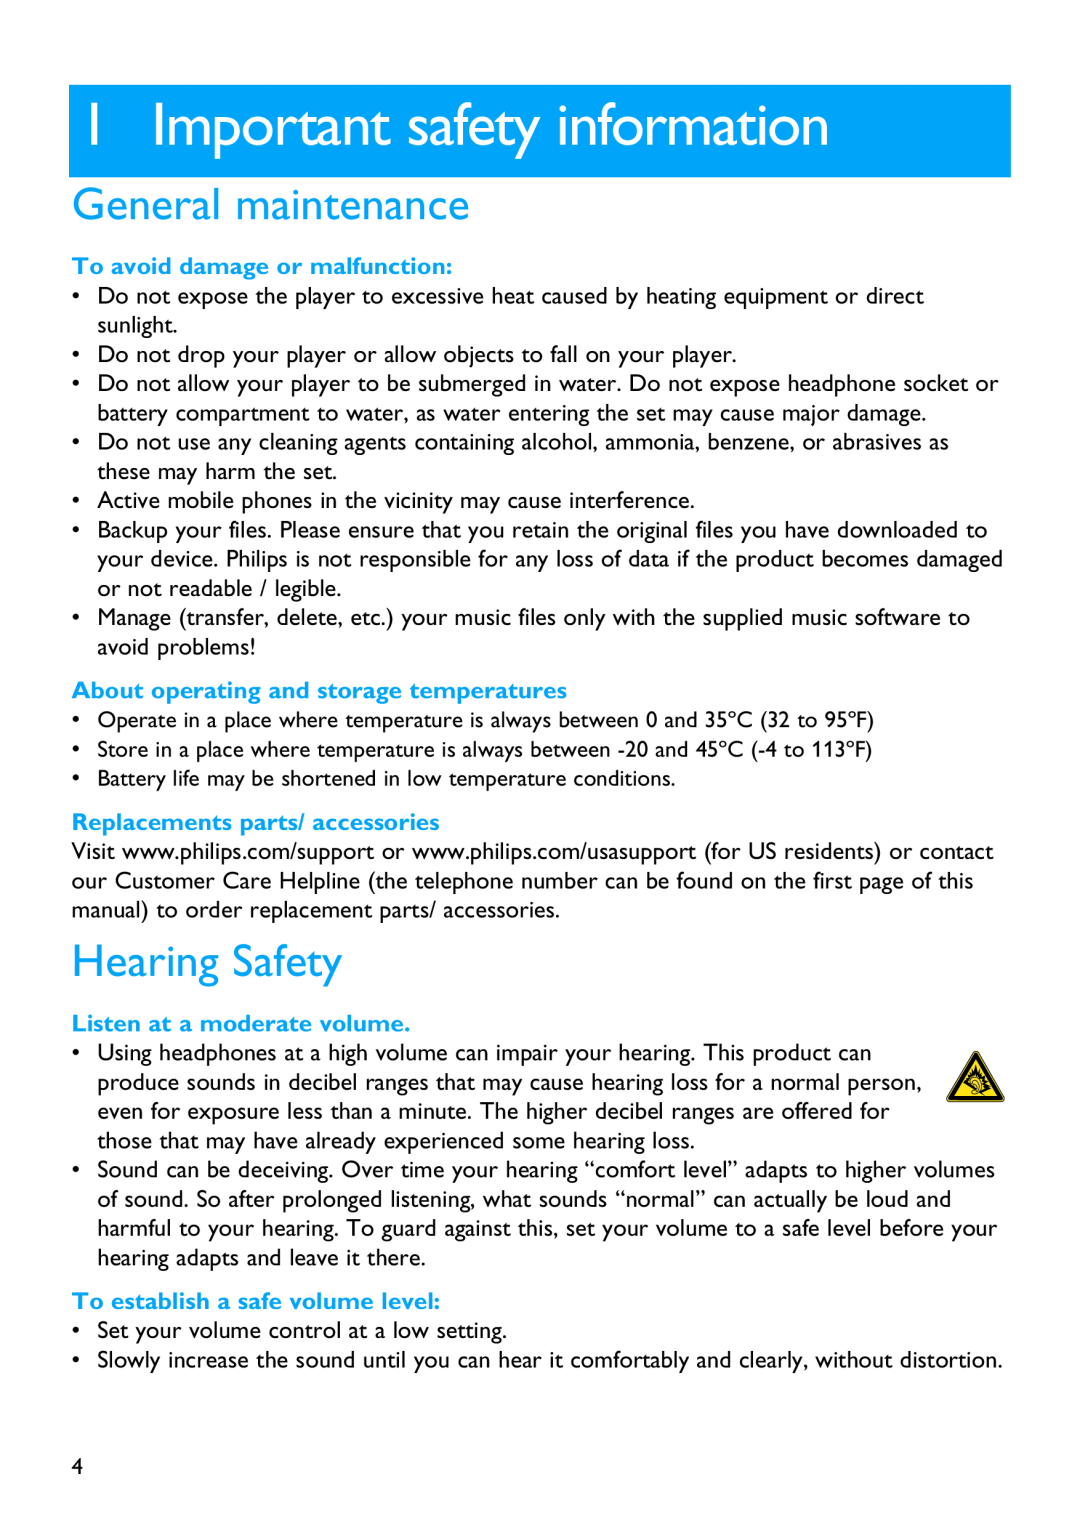 Philips SA2100 manual Important safety information, General maintenance, Hearing Safety, To avoid damage or malfunction 